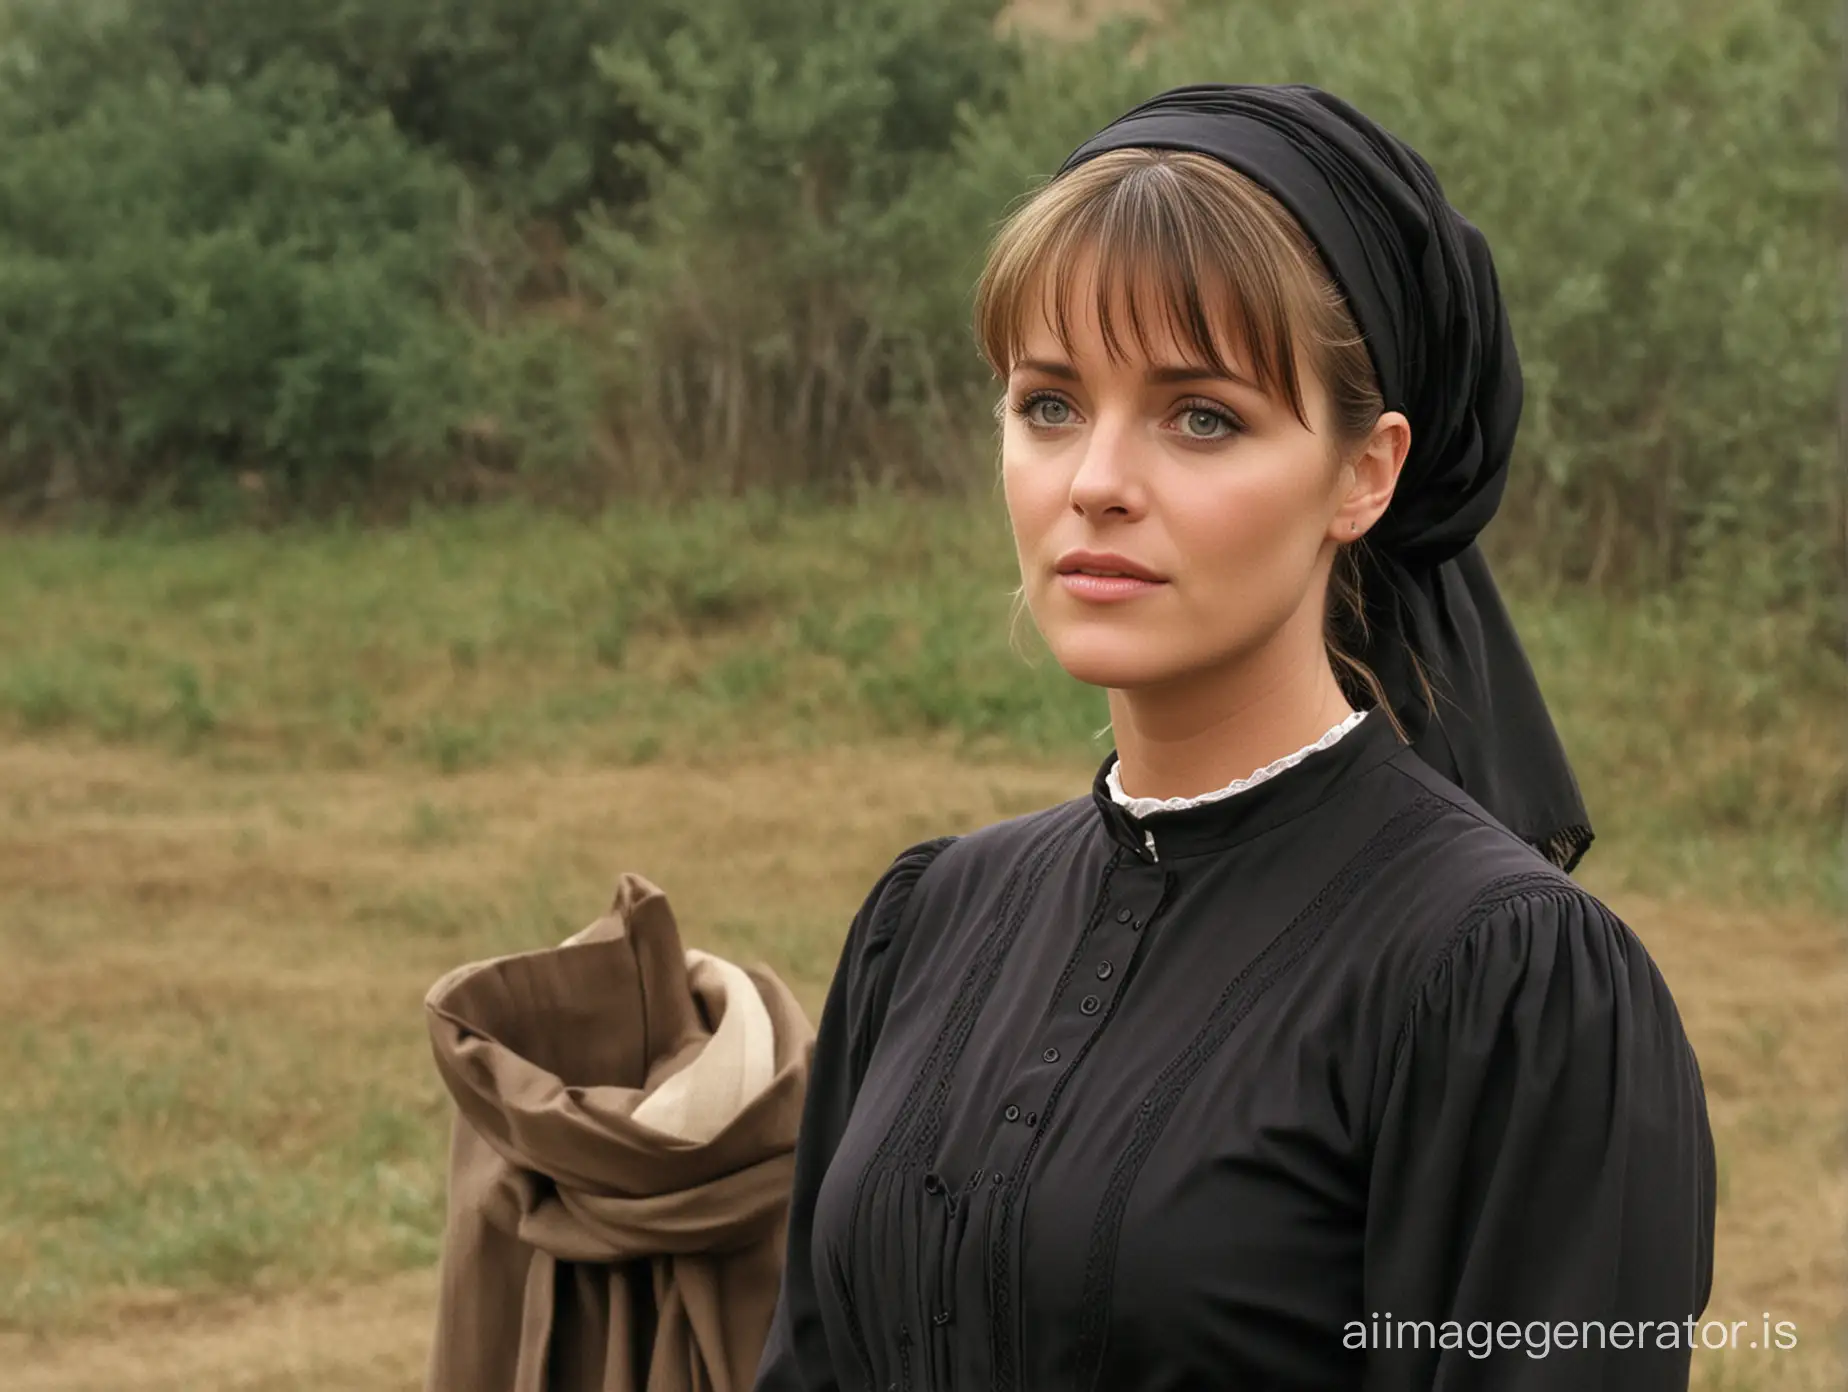 Amanda Tapping as Samantha Carter from SG1 is kidnapped and brought in a sect like old hidden religious community ruled by an 70 year old Amish preacher . Once in his farm , the old preacher hypnotized Samantha guiding her mind to accept his love and devotion, forcing her to willingly become his beloved devoted wife.dressed and veiled as prim and proper Amish submissive wife